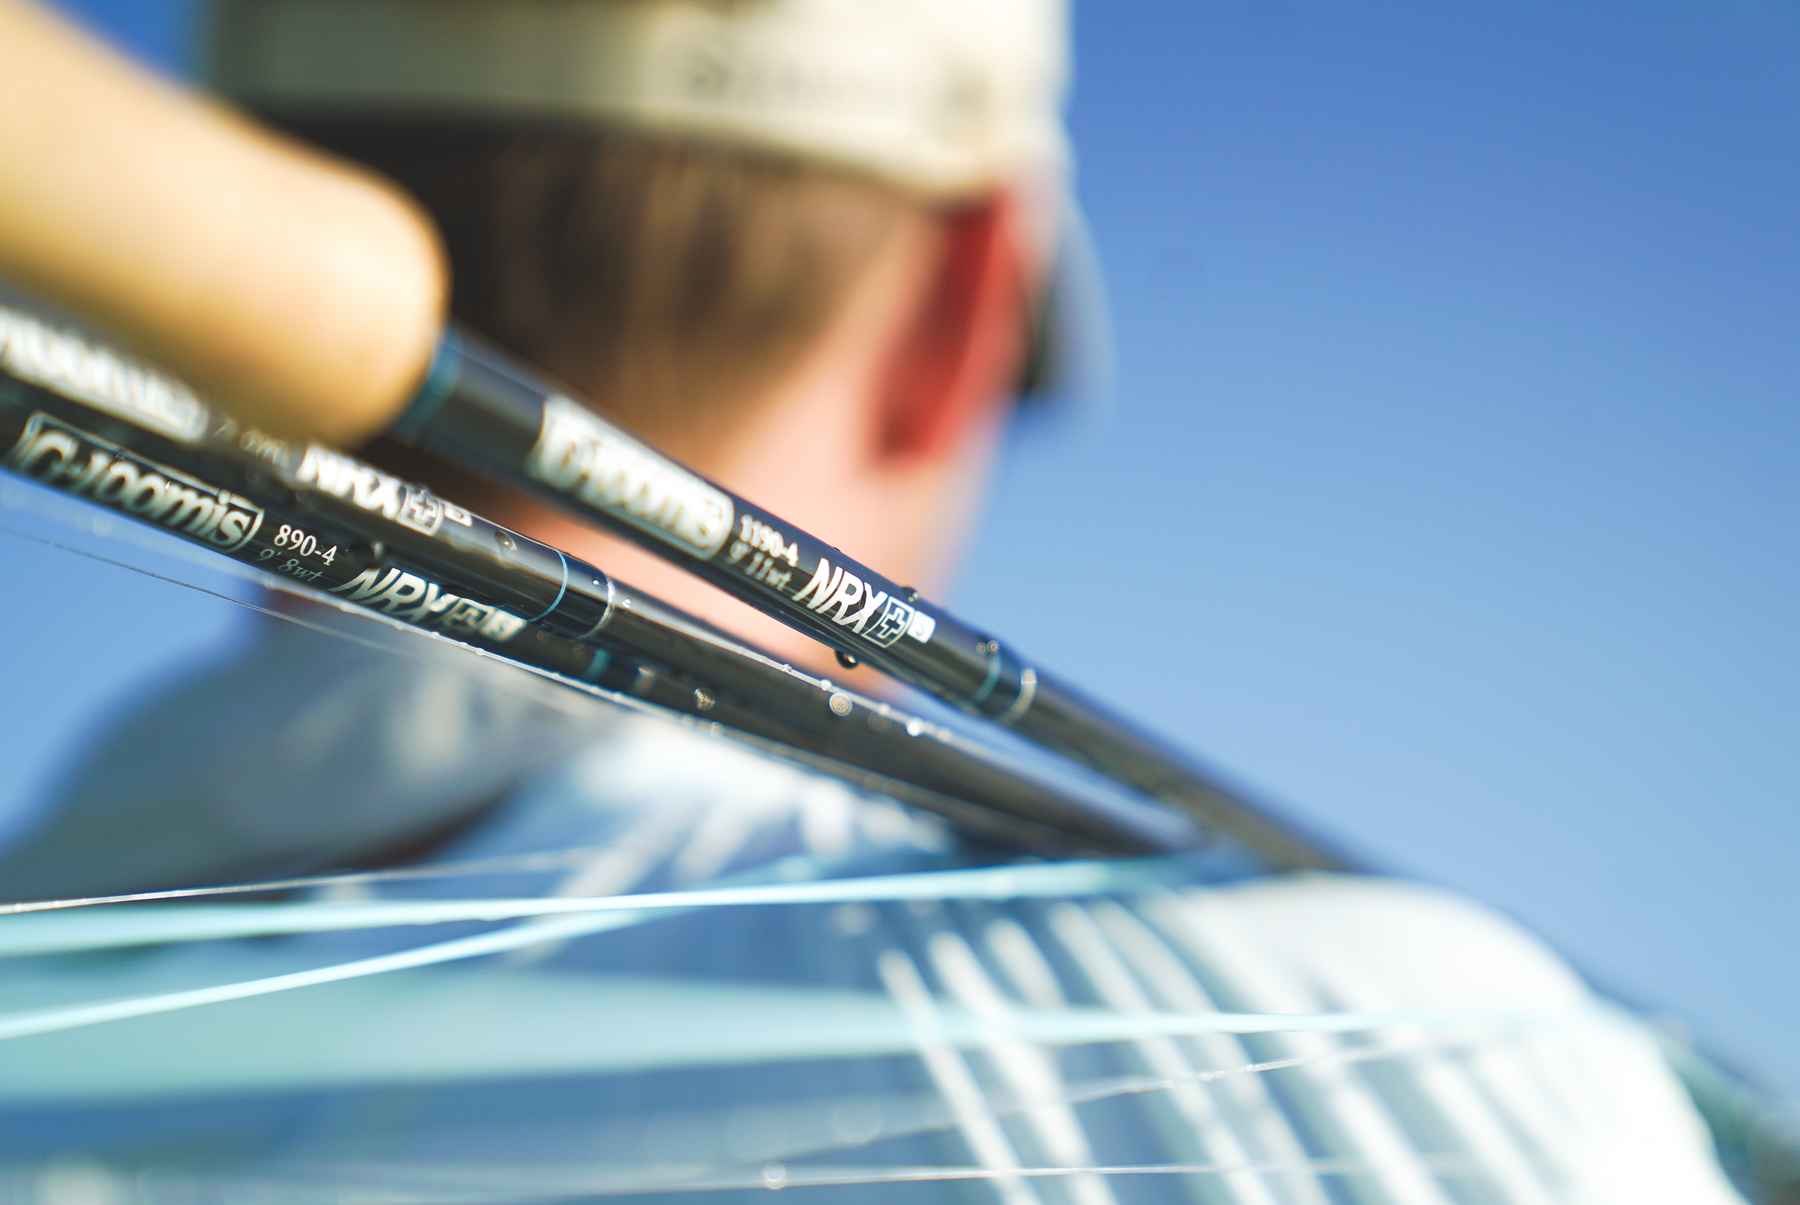 G. Loomis intros the NRX+ fly rod, successor to the wildly popular NRX